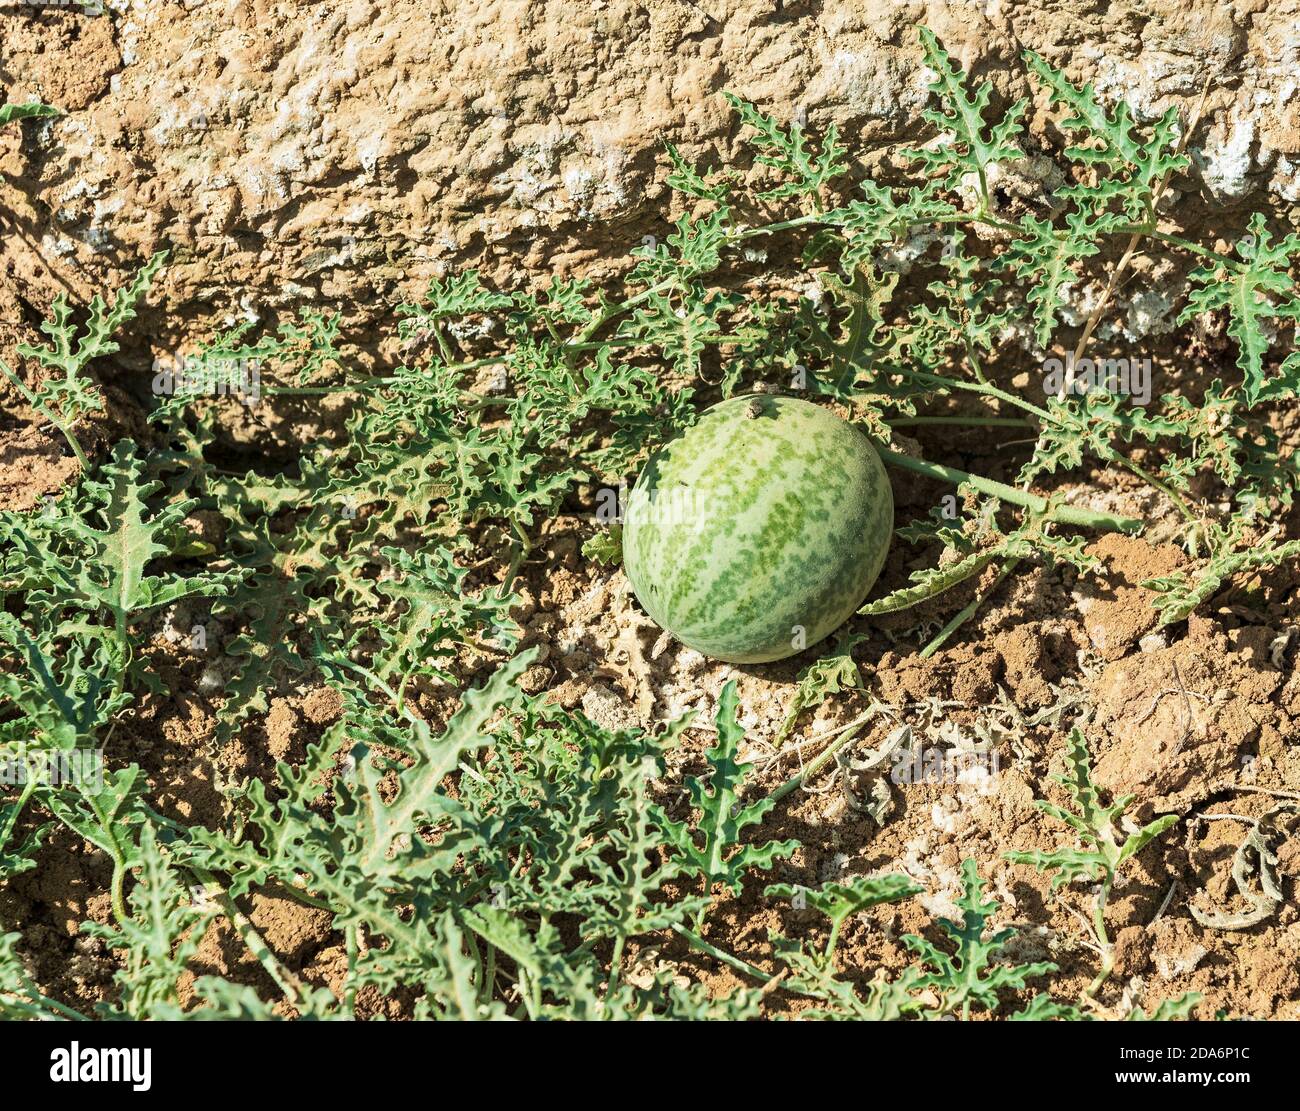 ripening gourd of an inedible desert watermelon plant Citrullus colocynthis growing in a sandy stream bed in the makhtesh ramon crater in israel Stock Photo